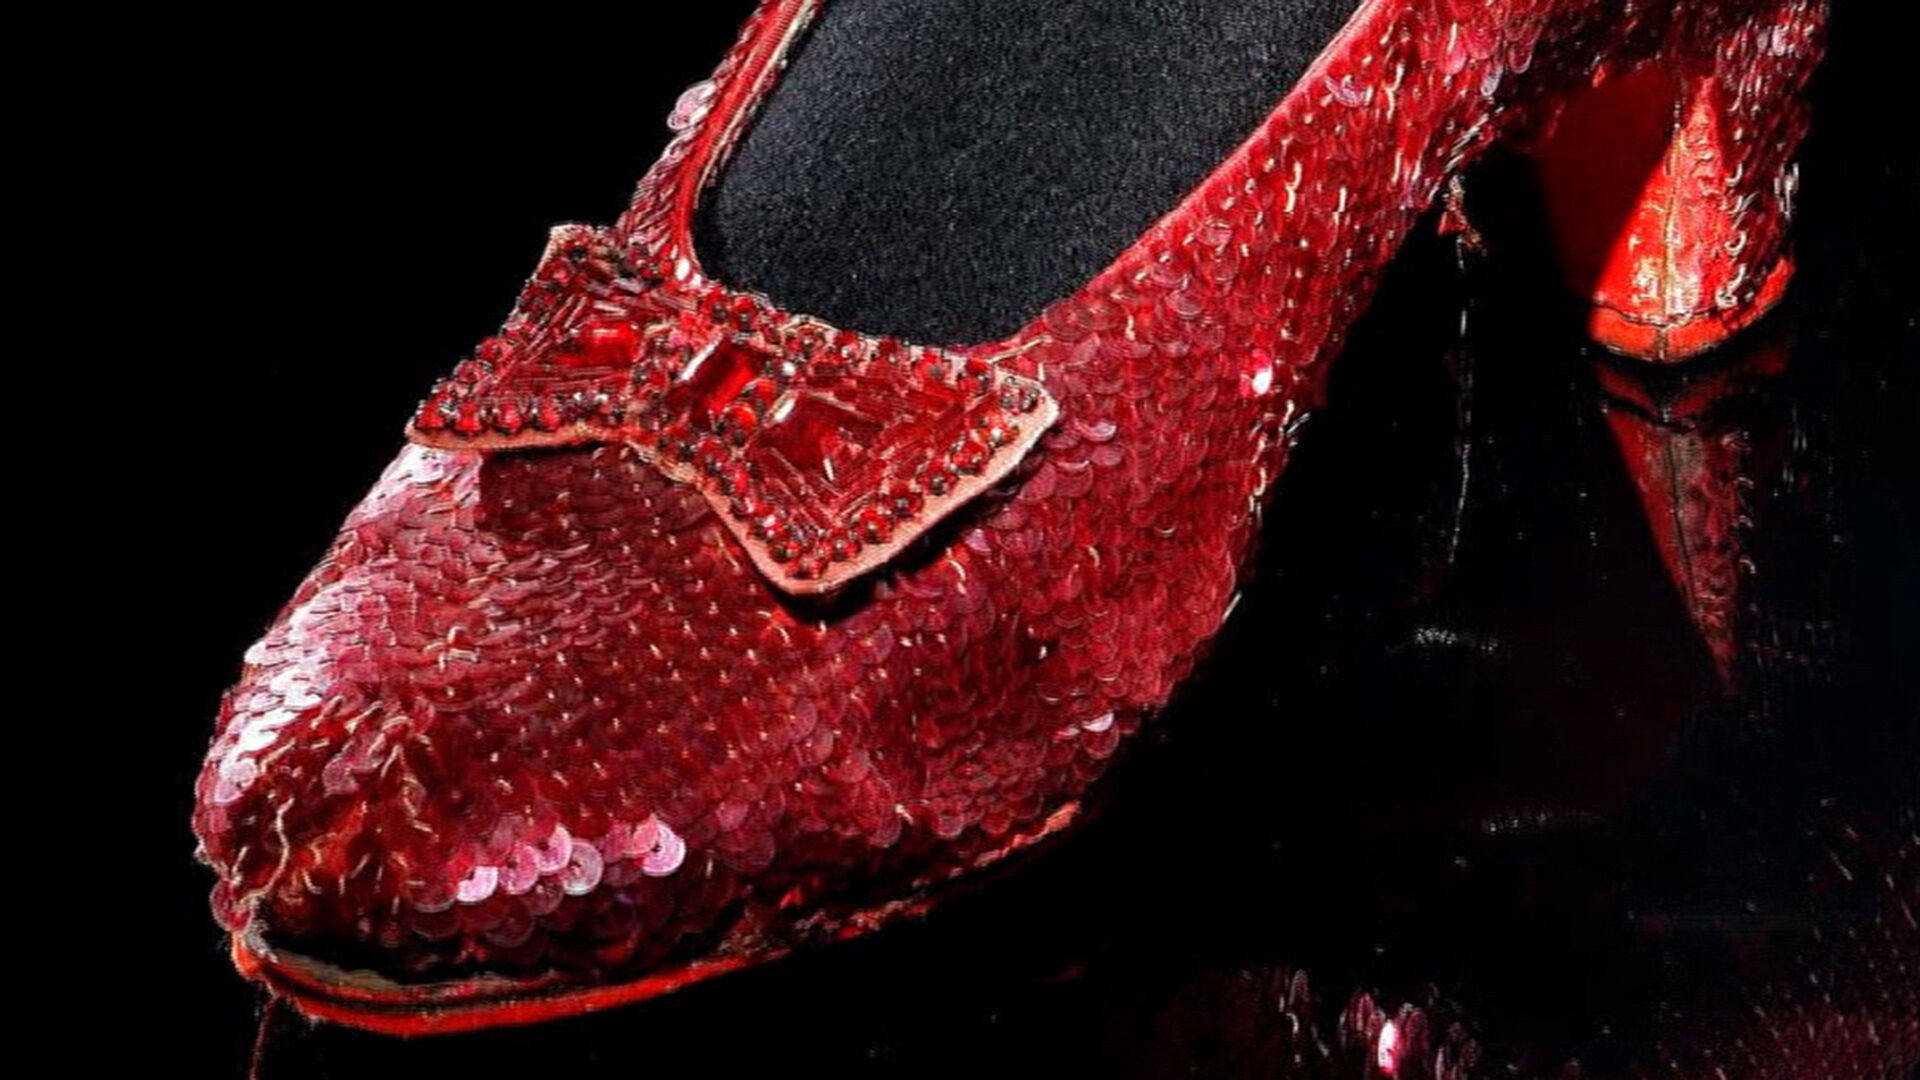 The Smithsonian is holding a fundraiser to restore Dorothy&#8217;s ruby slippers